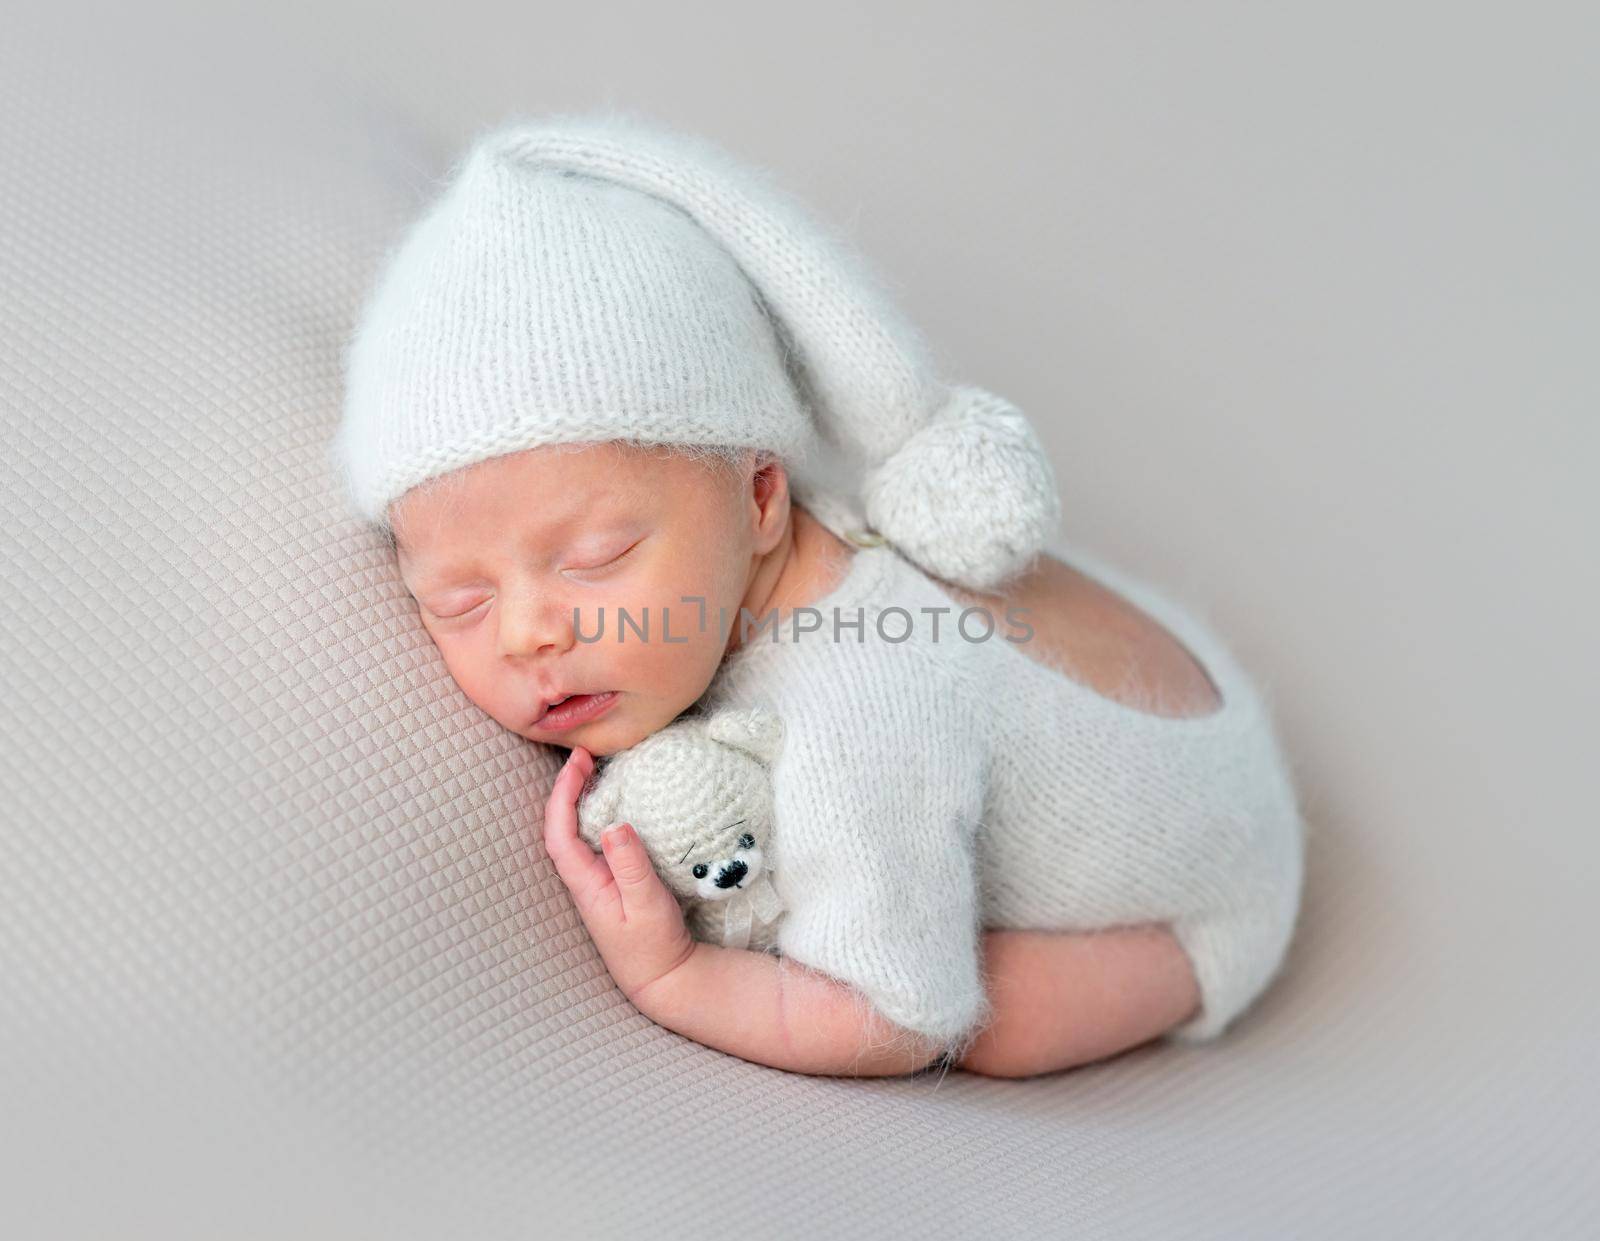 Cute little baby in white hat and knitted suit with toy sweetly sleeping